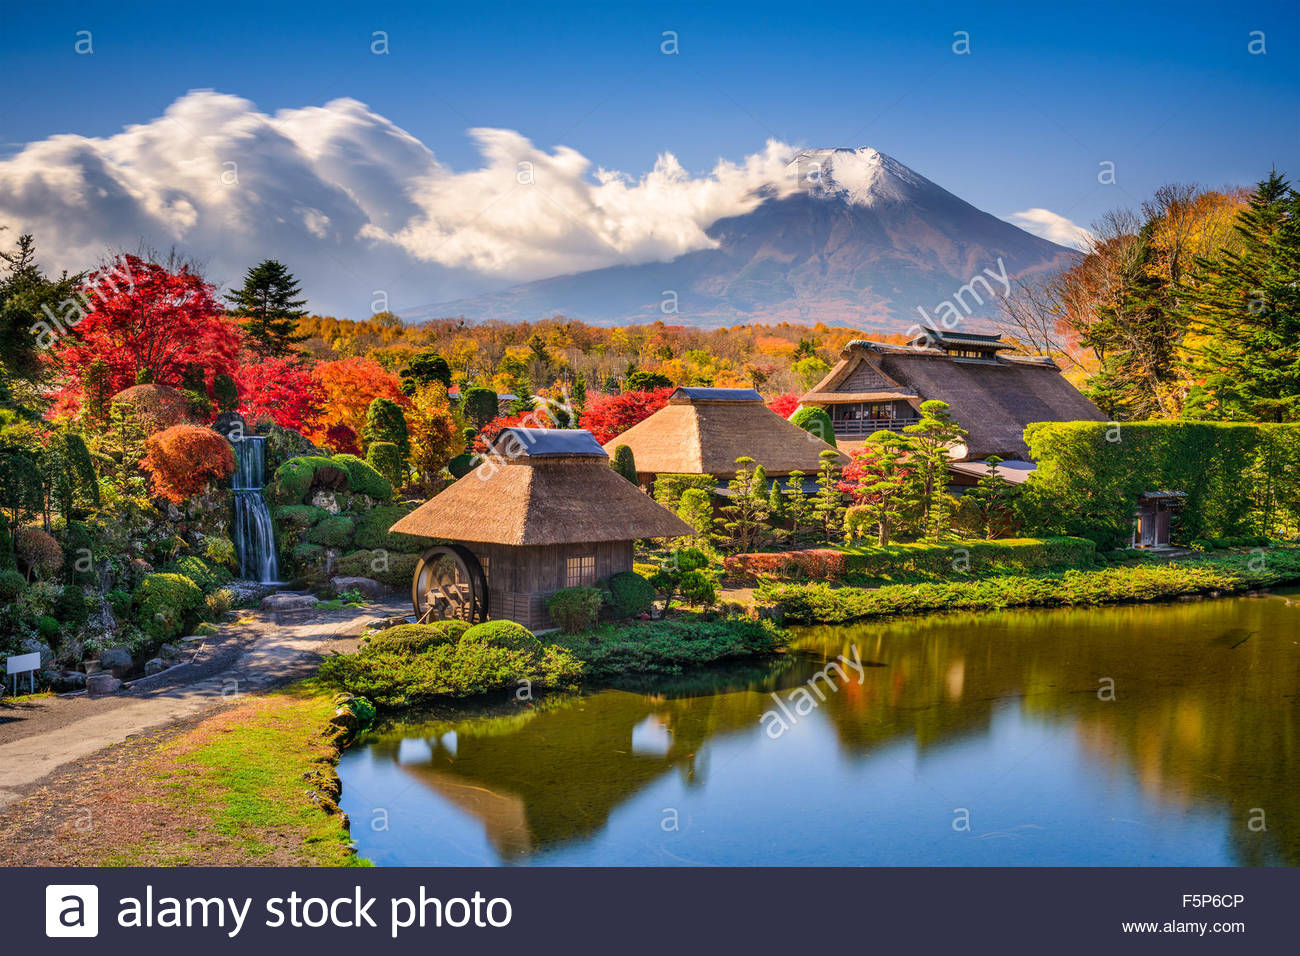 Oshino Japan Historic Thatch Houses With Mt Fuji In The